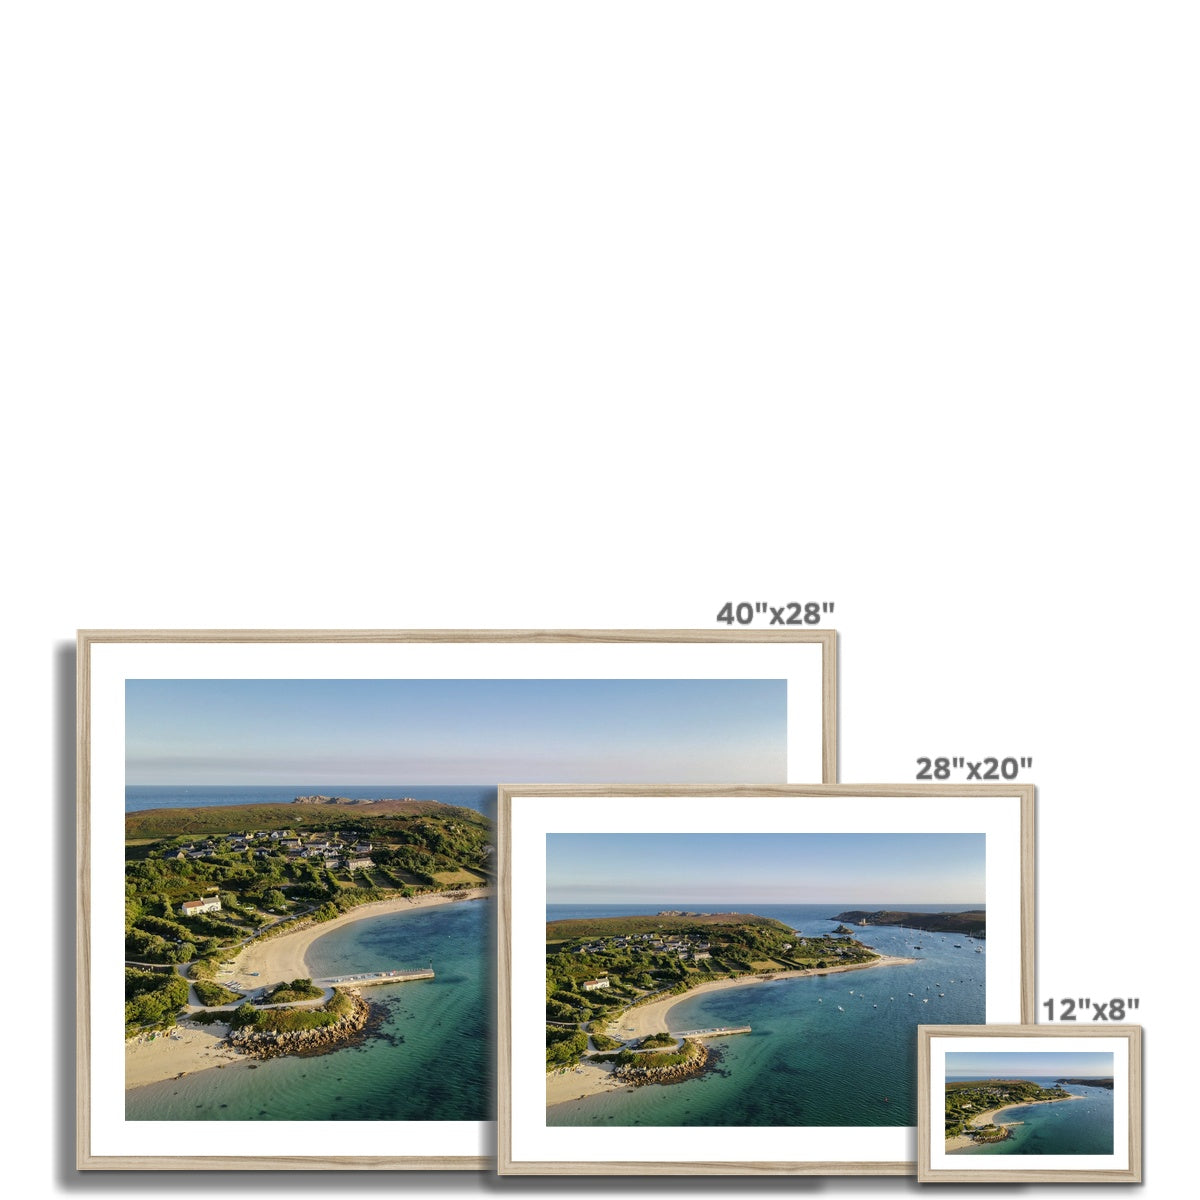 quay bryher wooden frame sizes